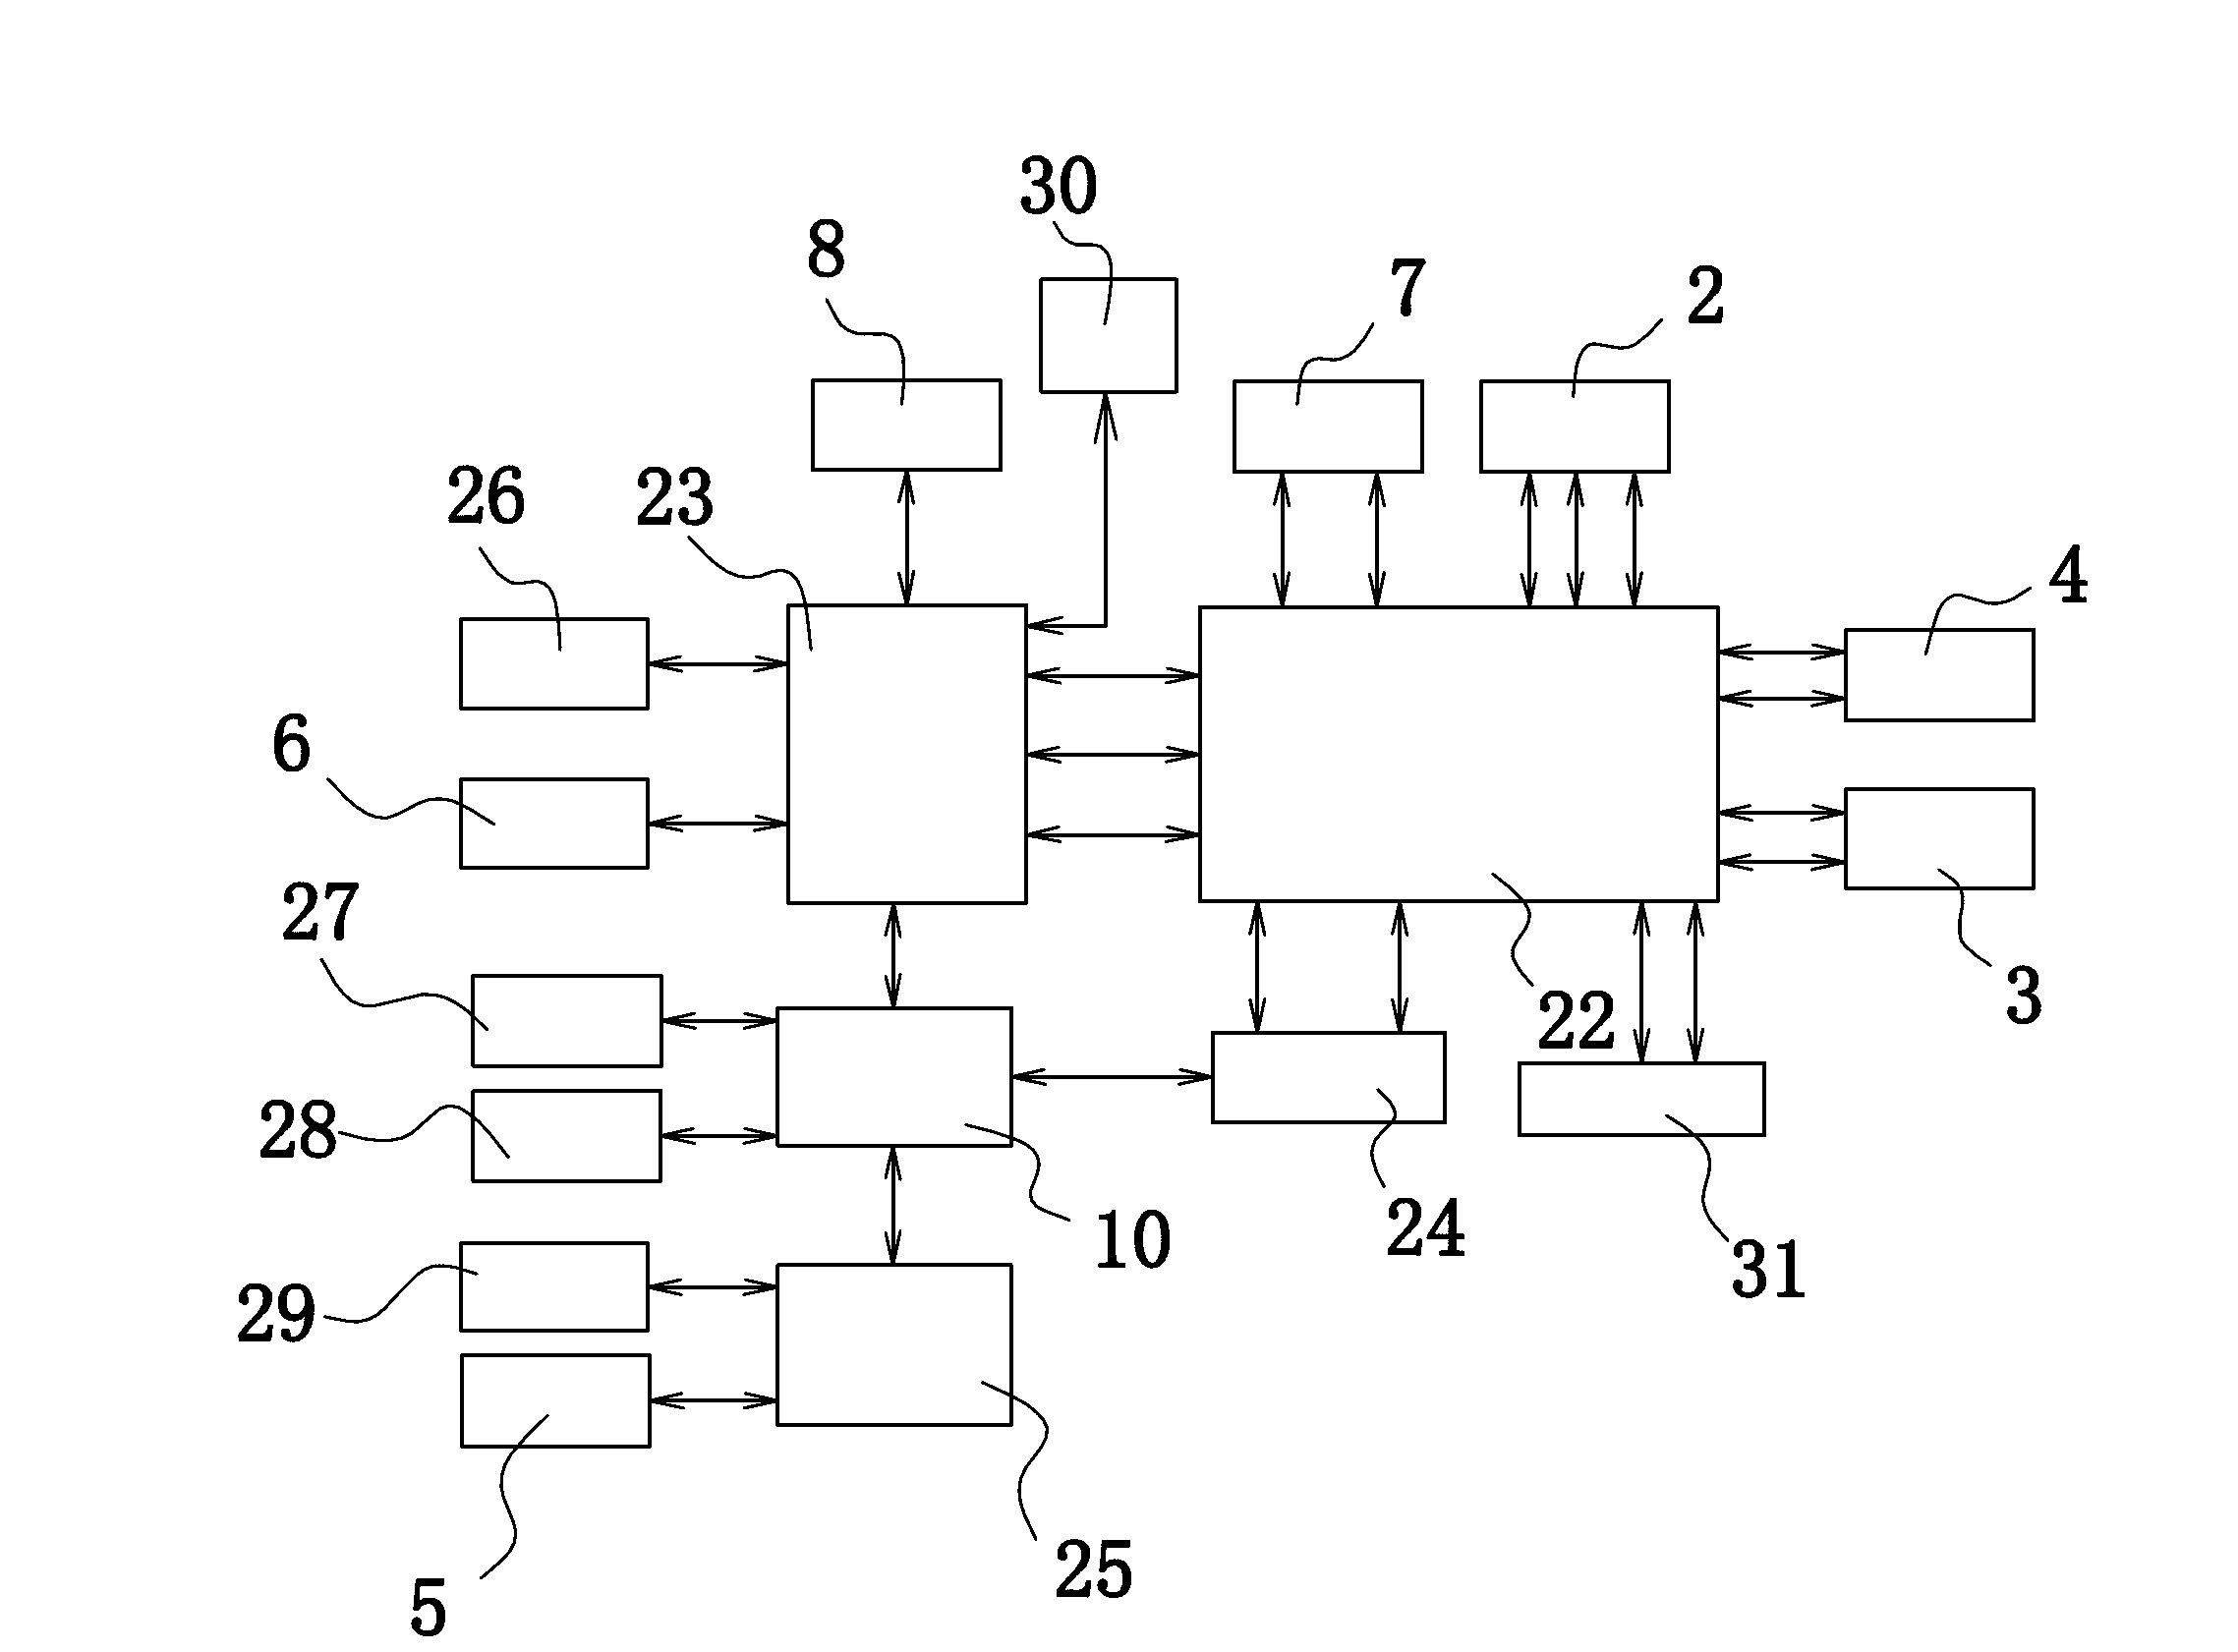 Communication system based on integrated access gateway